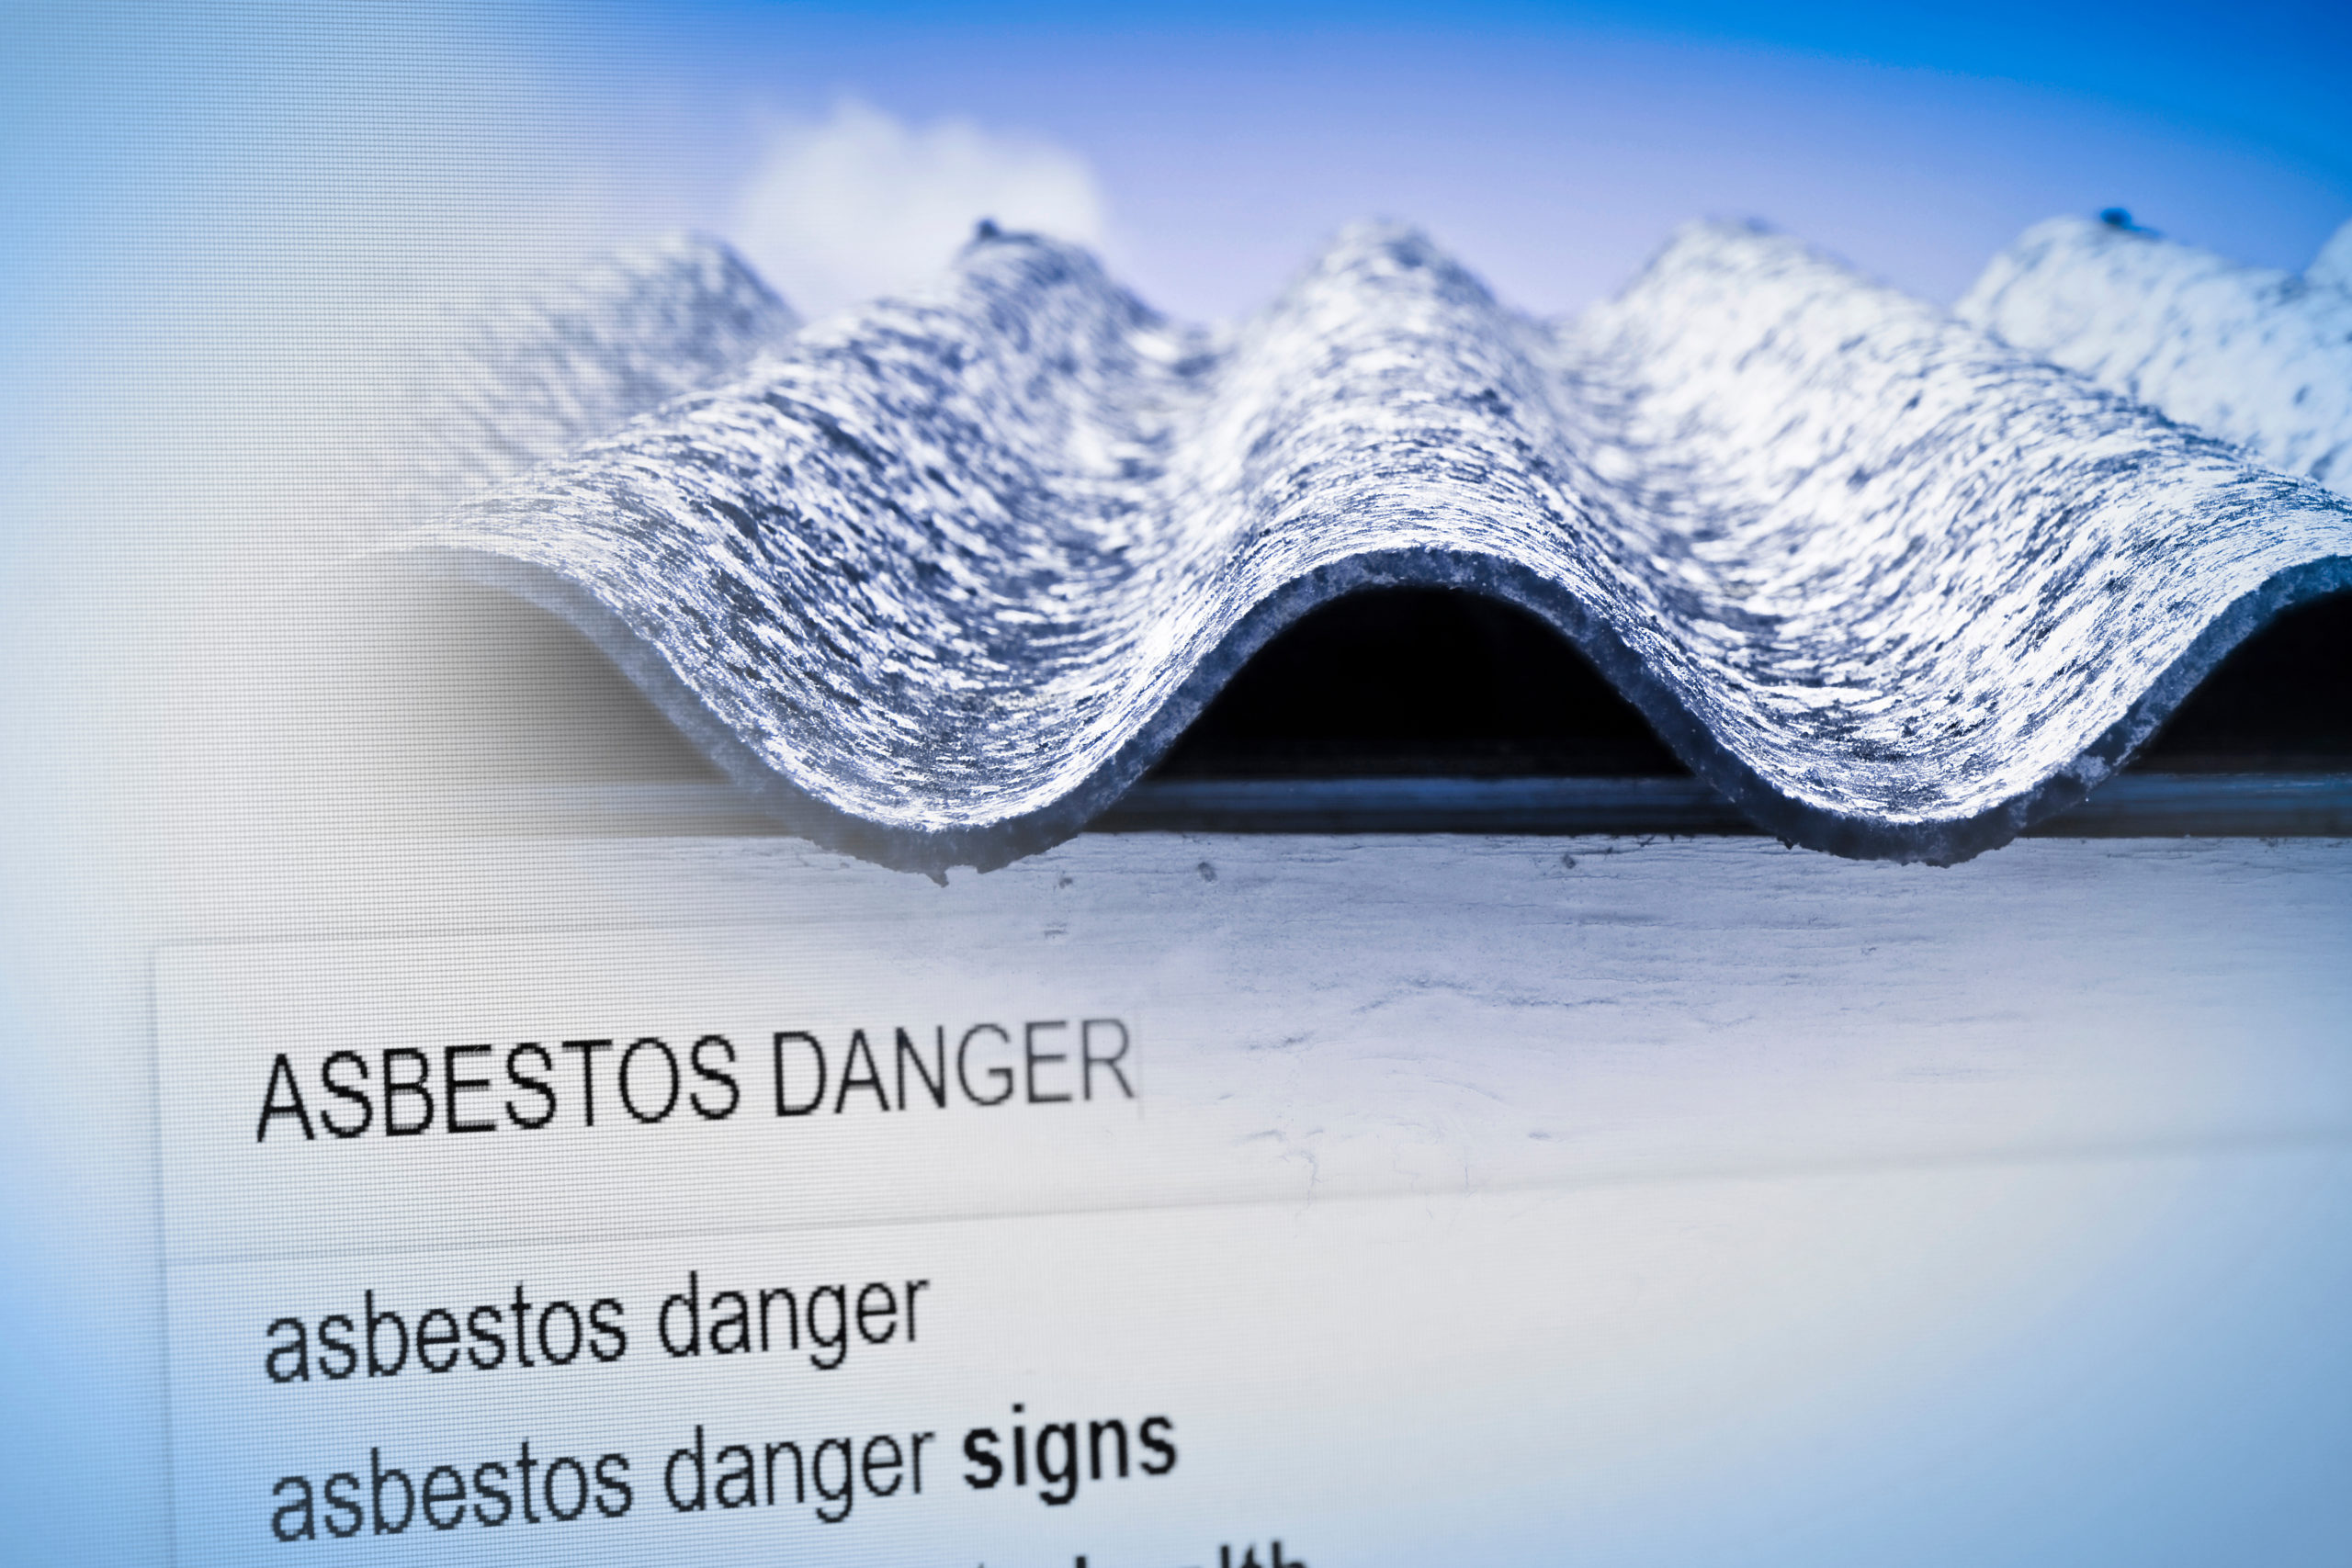 Court Papers Reveal UK Asbestos Manufacturer withheld Information